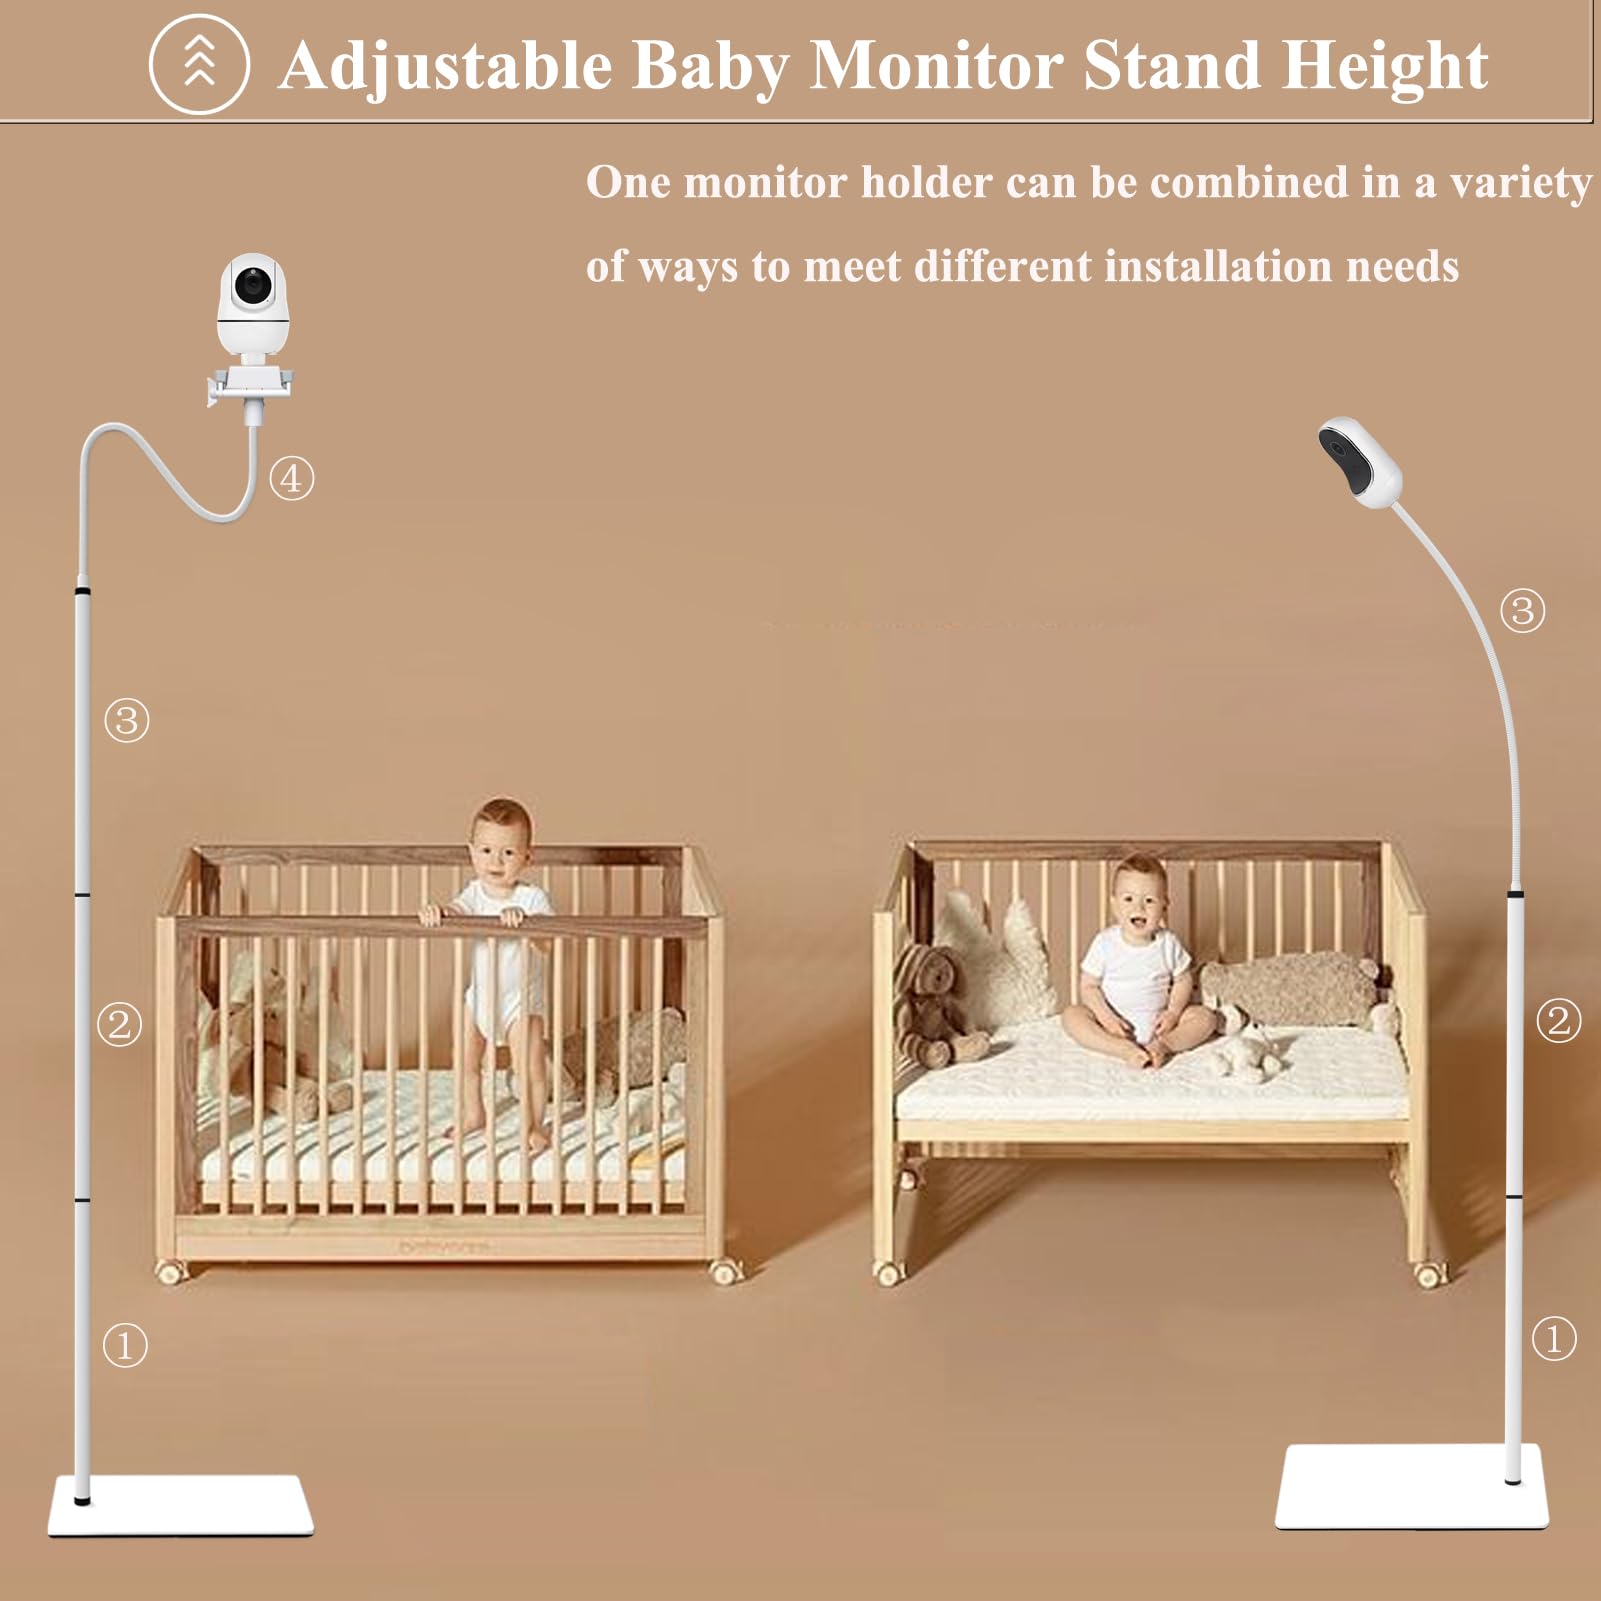 Baby Monitor Mount Floor Stand Holder Compactible with Infant Optics DXR-8 Pro,Nanit Pro,Vetch,eufy,Momcozy BM01,HelloBaby HB6550/66/248,UKSUP,ANMEATE SM935E,Arlo,VAVA,Baby Monitor with a Screw Hole